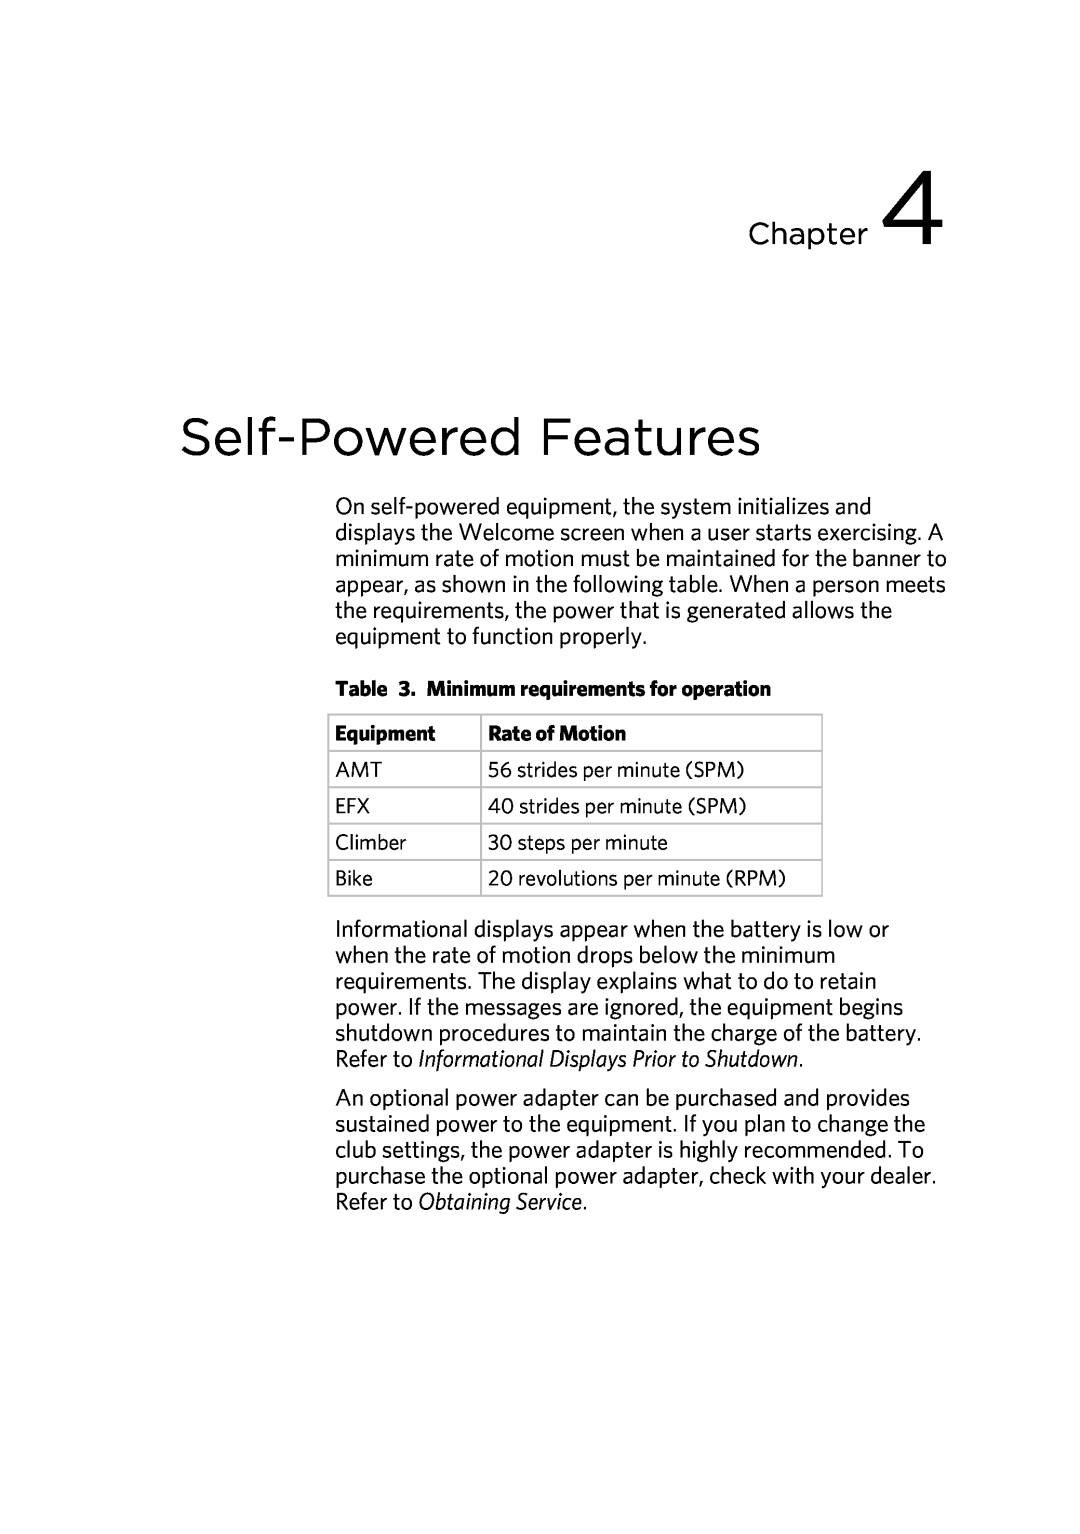 Precor 300753-201 manual Self-Powered Features, Chapter, Minimum requirements for operation, Equipment, Rate of Motion 